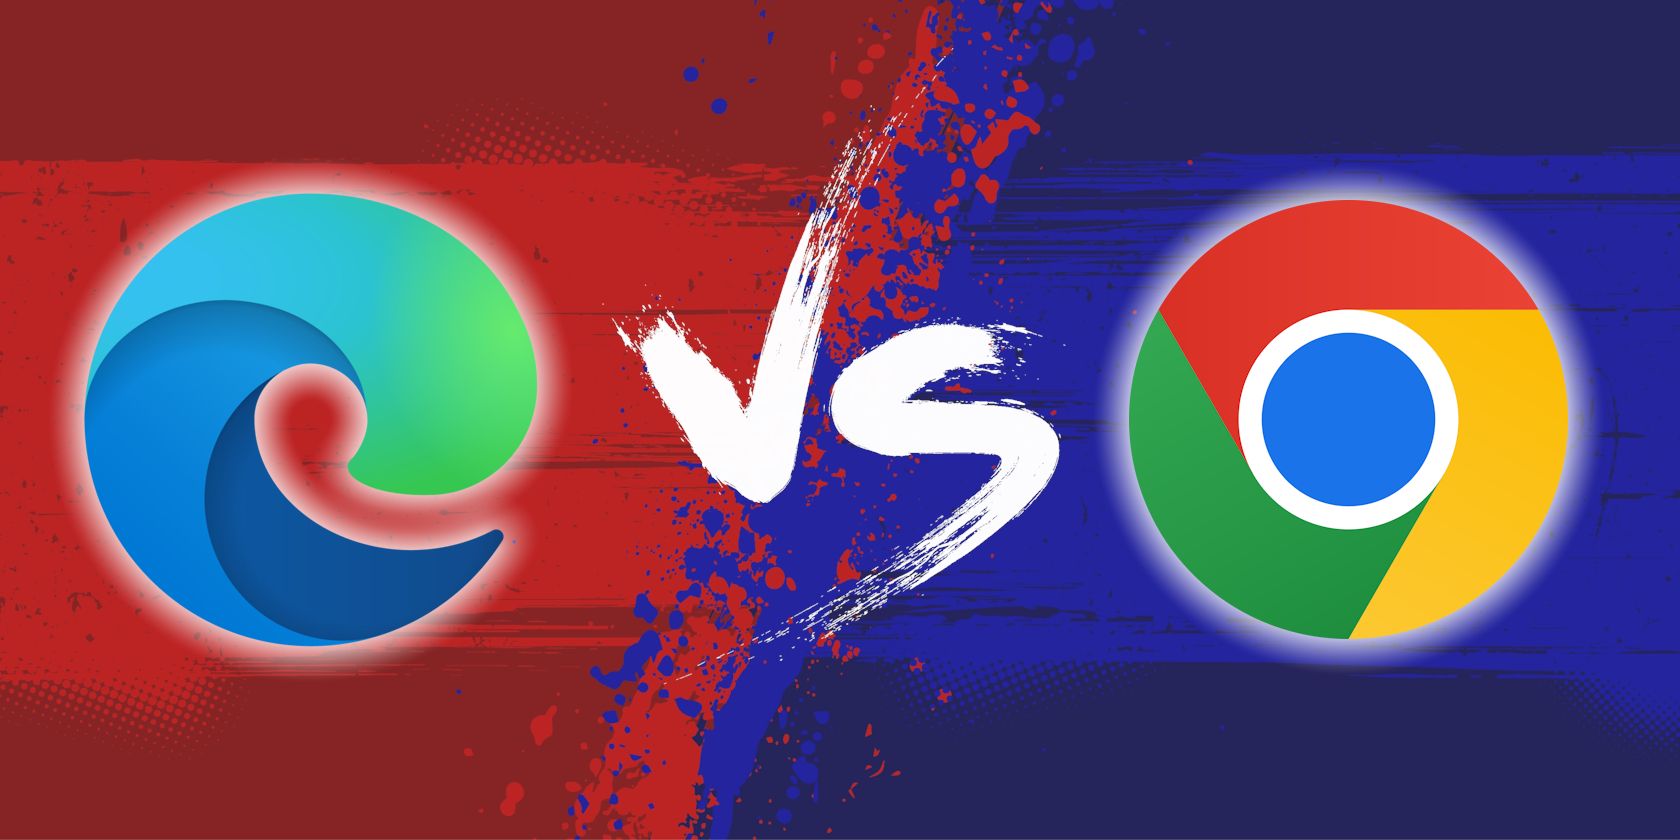 edge versus chrome logos with blue and red background